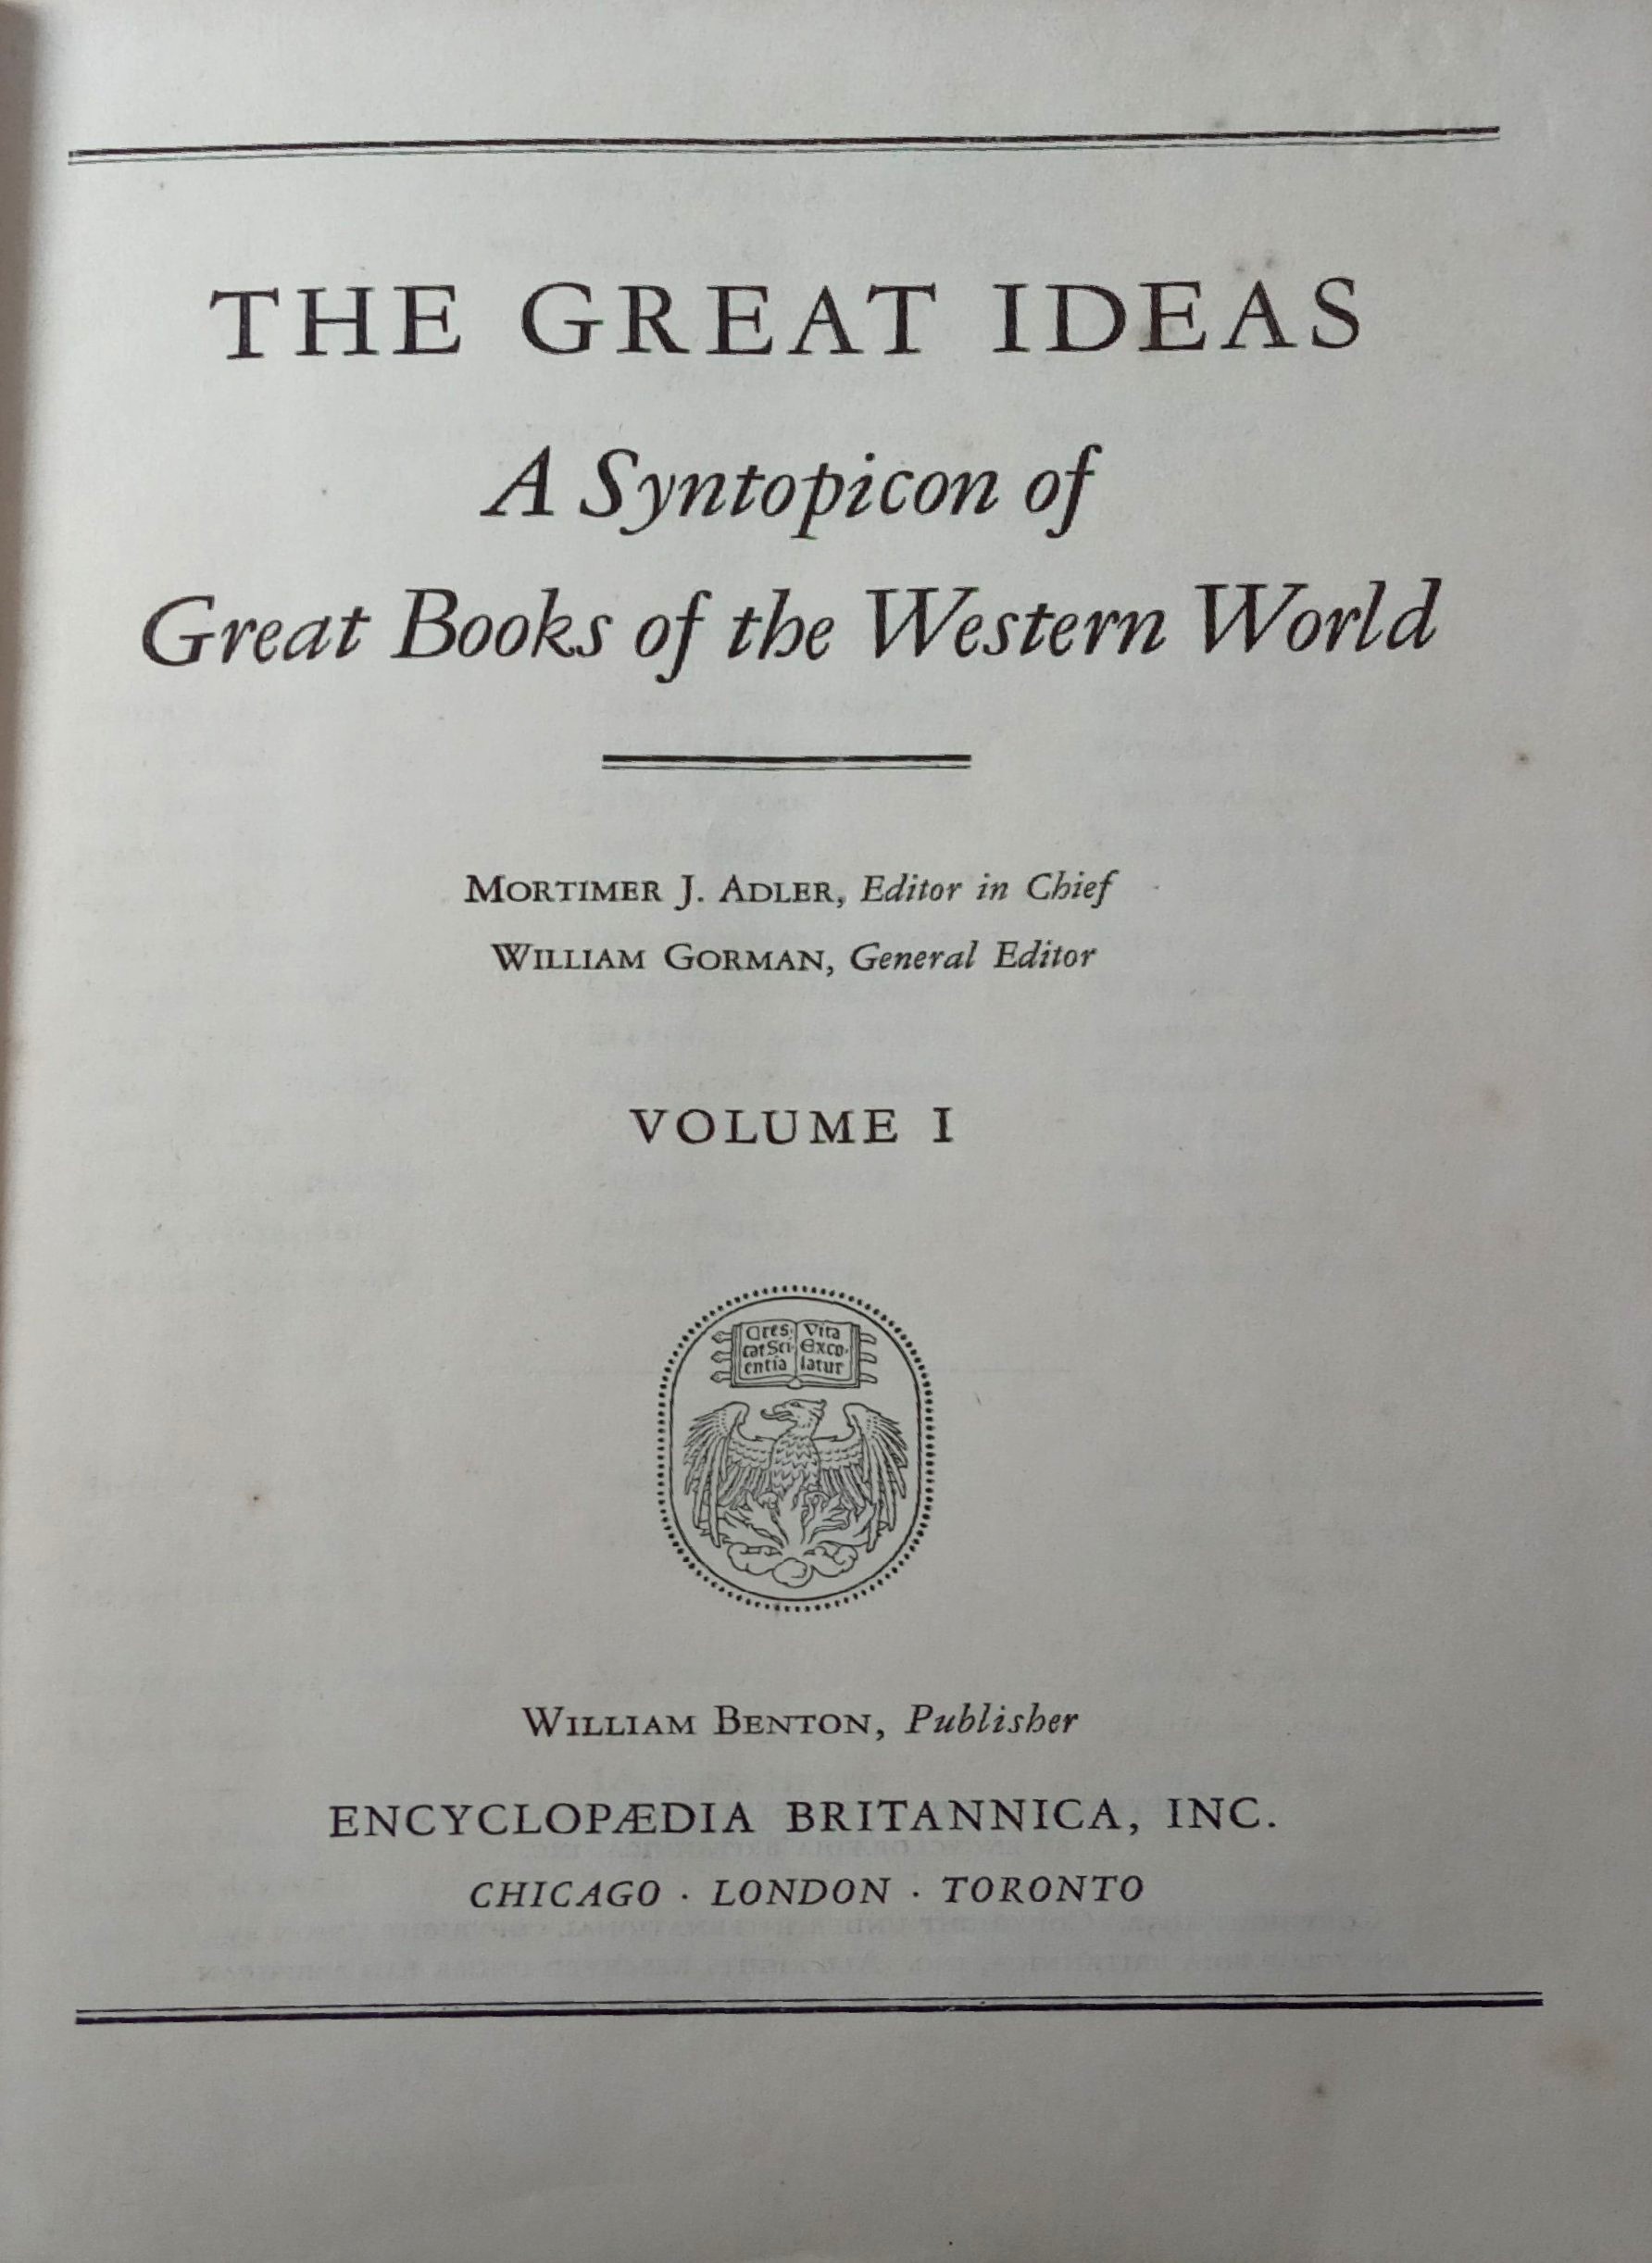 THE GREAT IDEAS: 1